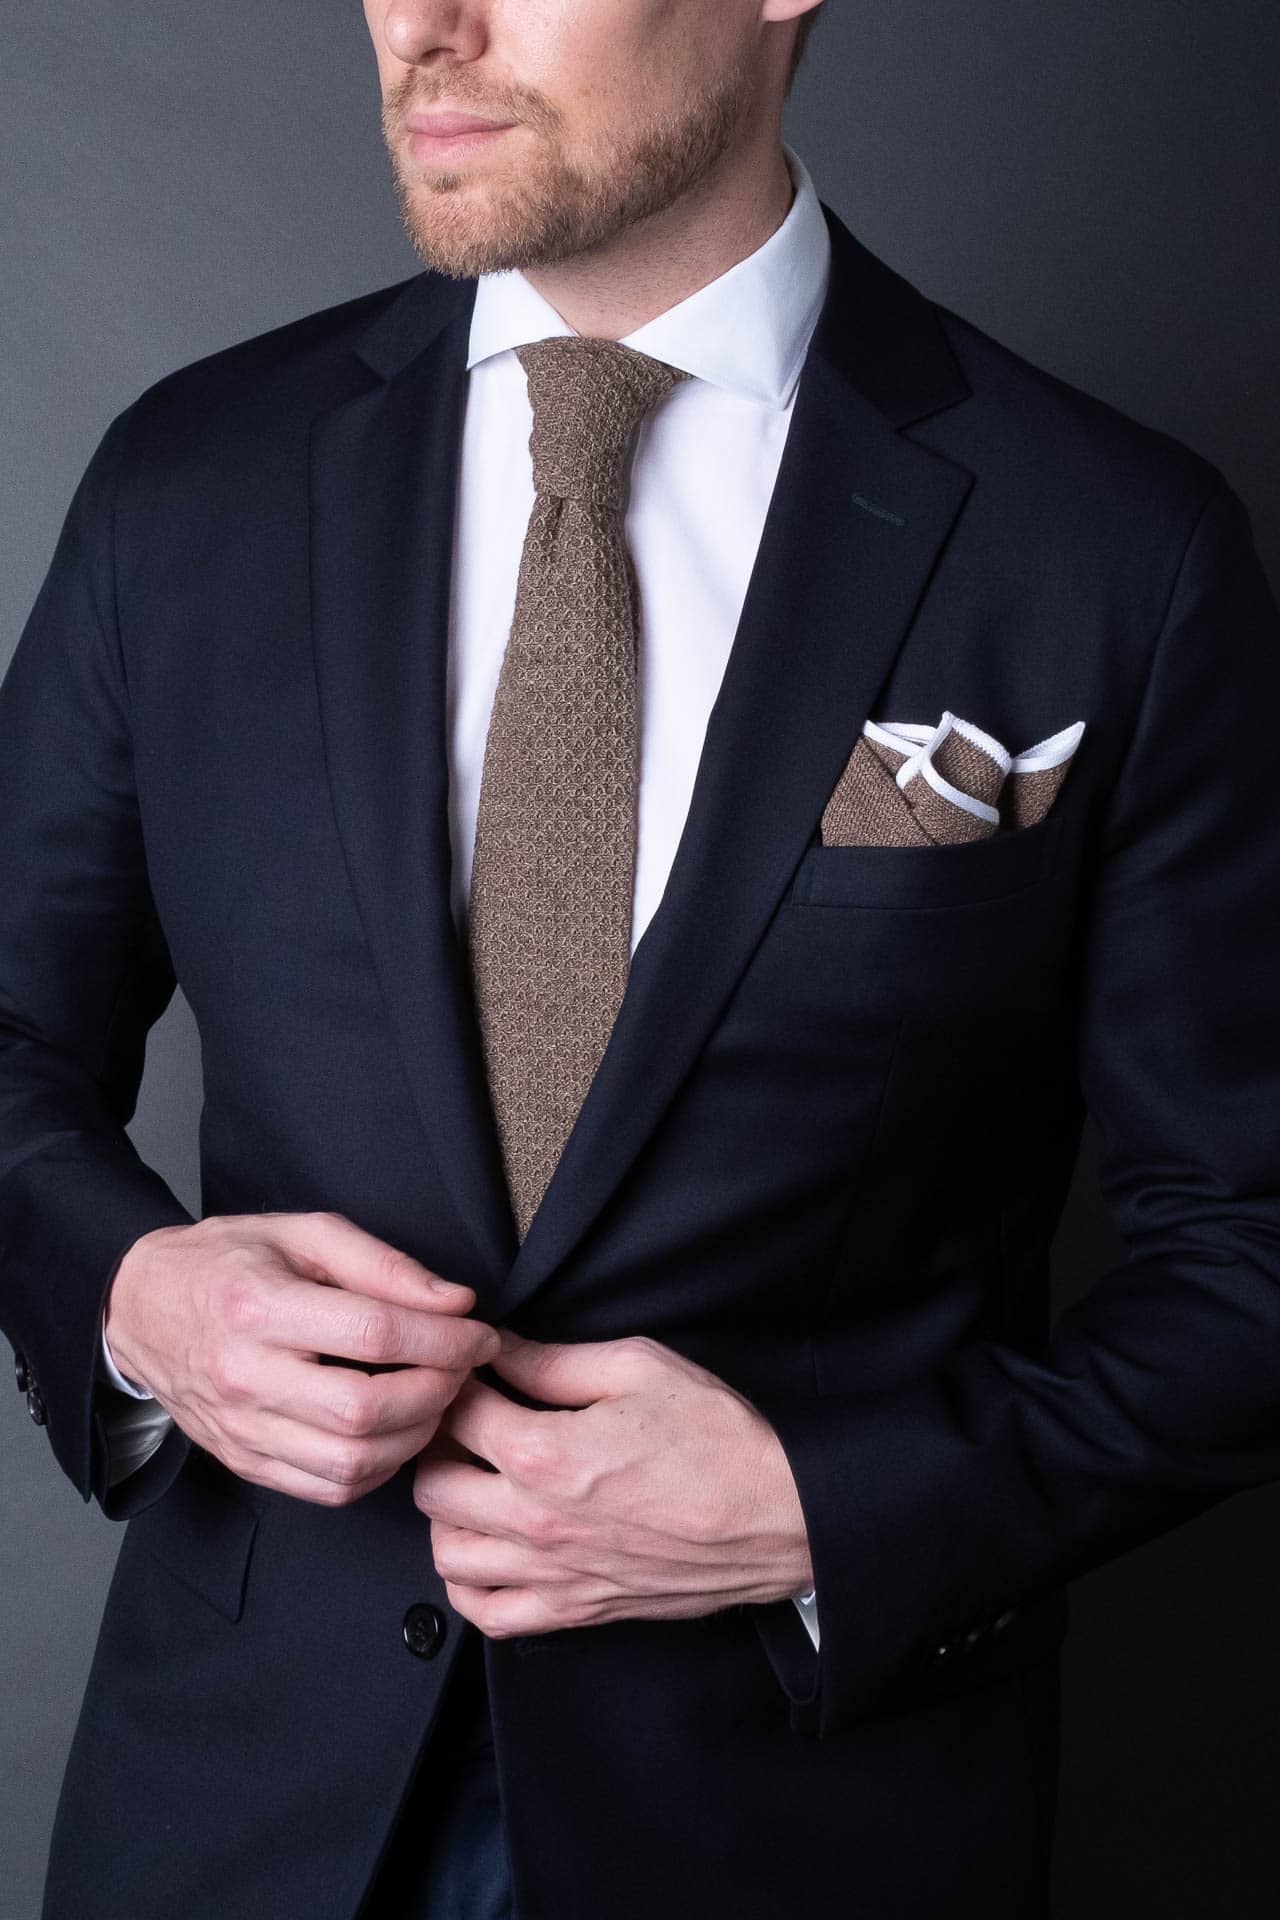 Brown-cotton-knitted-tie-with-square-tip-made-in-italy-combo-mathing-pocket-square